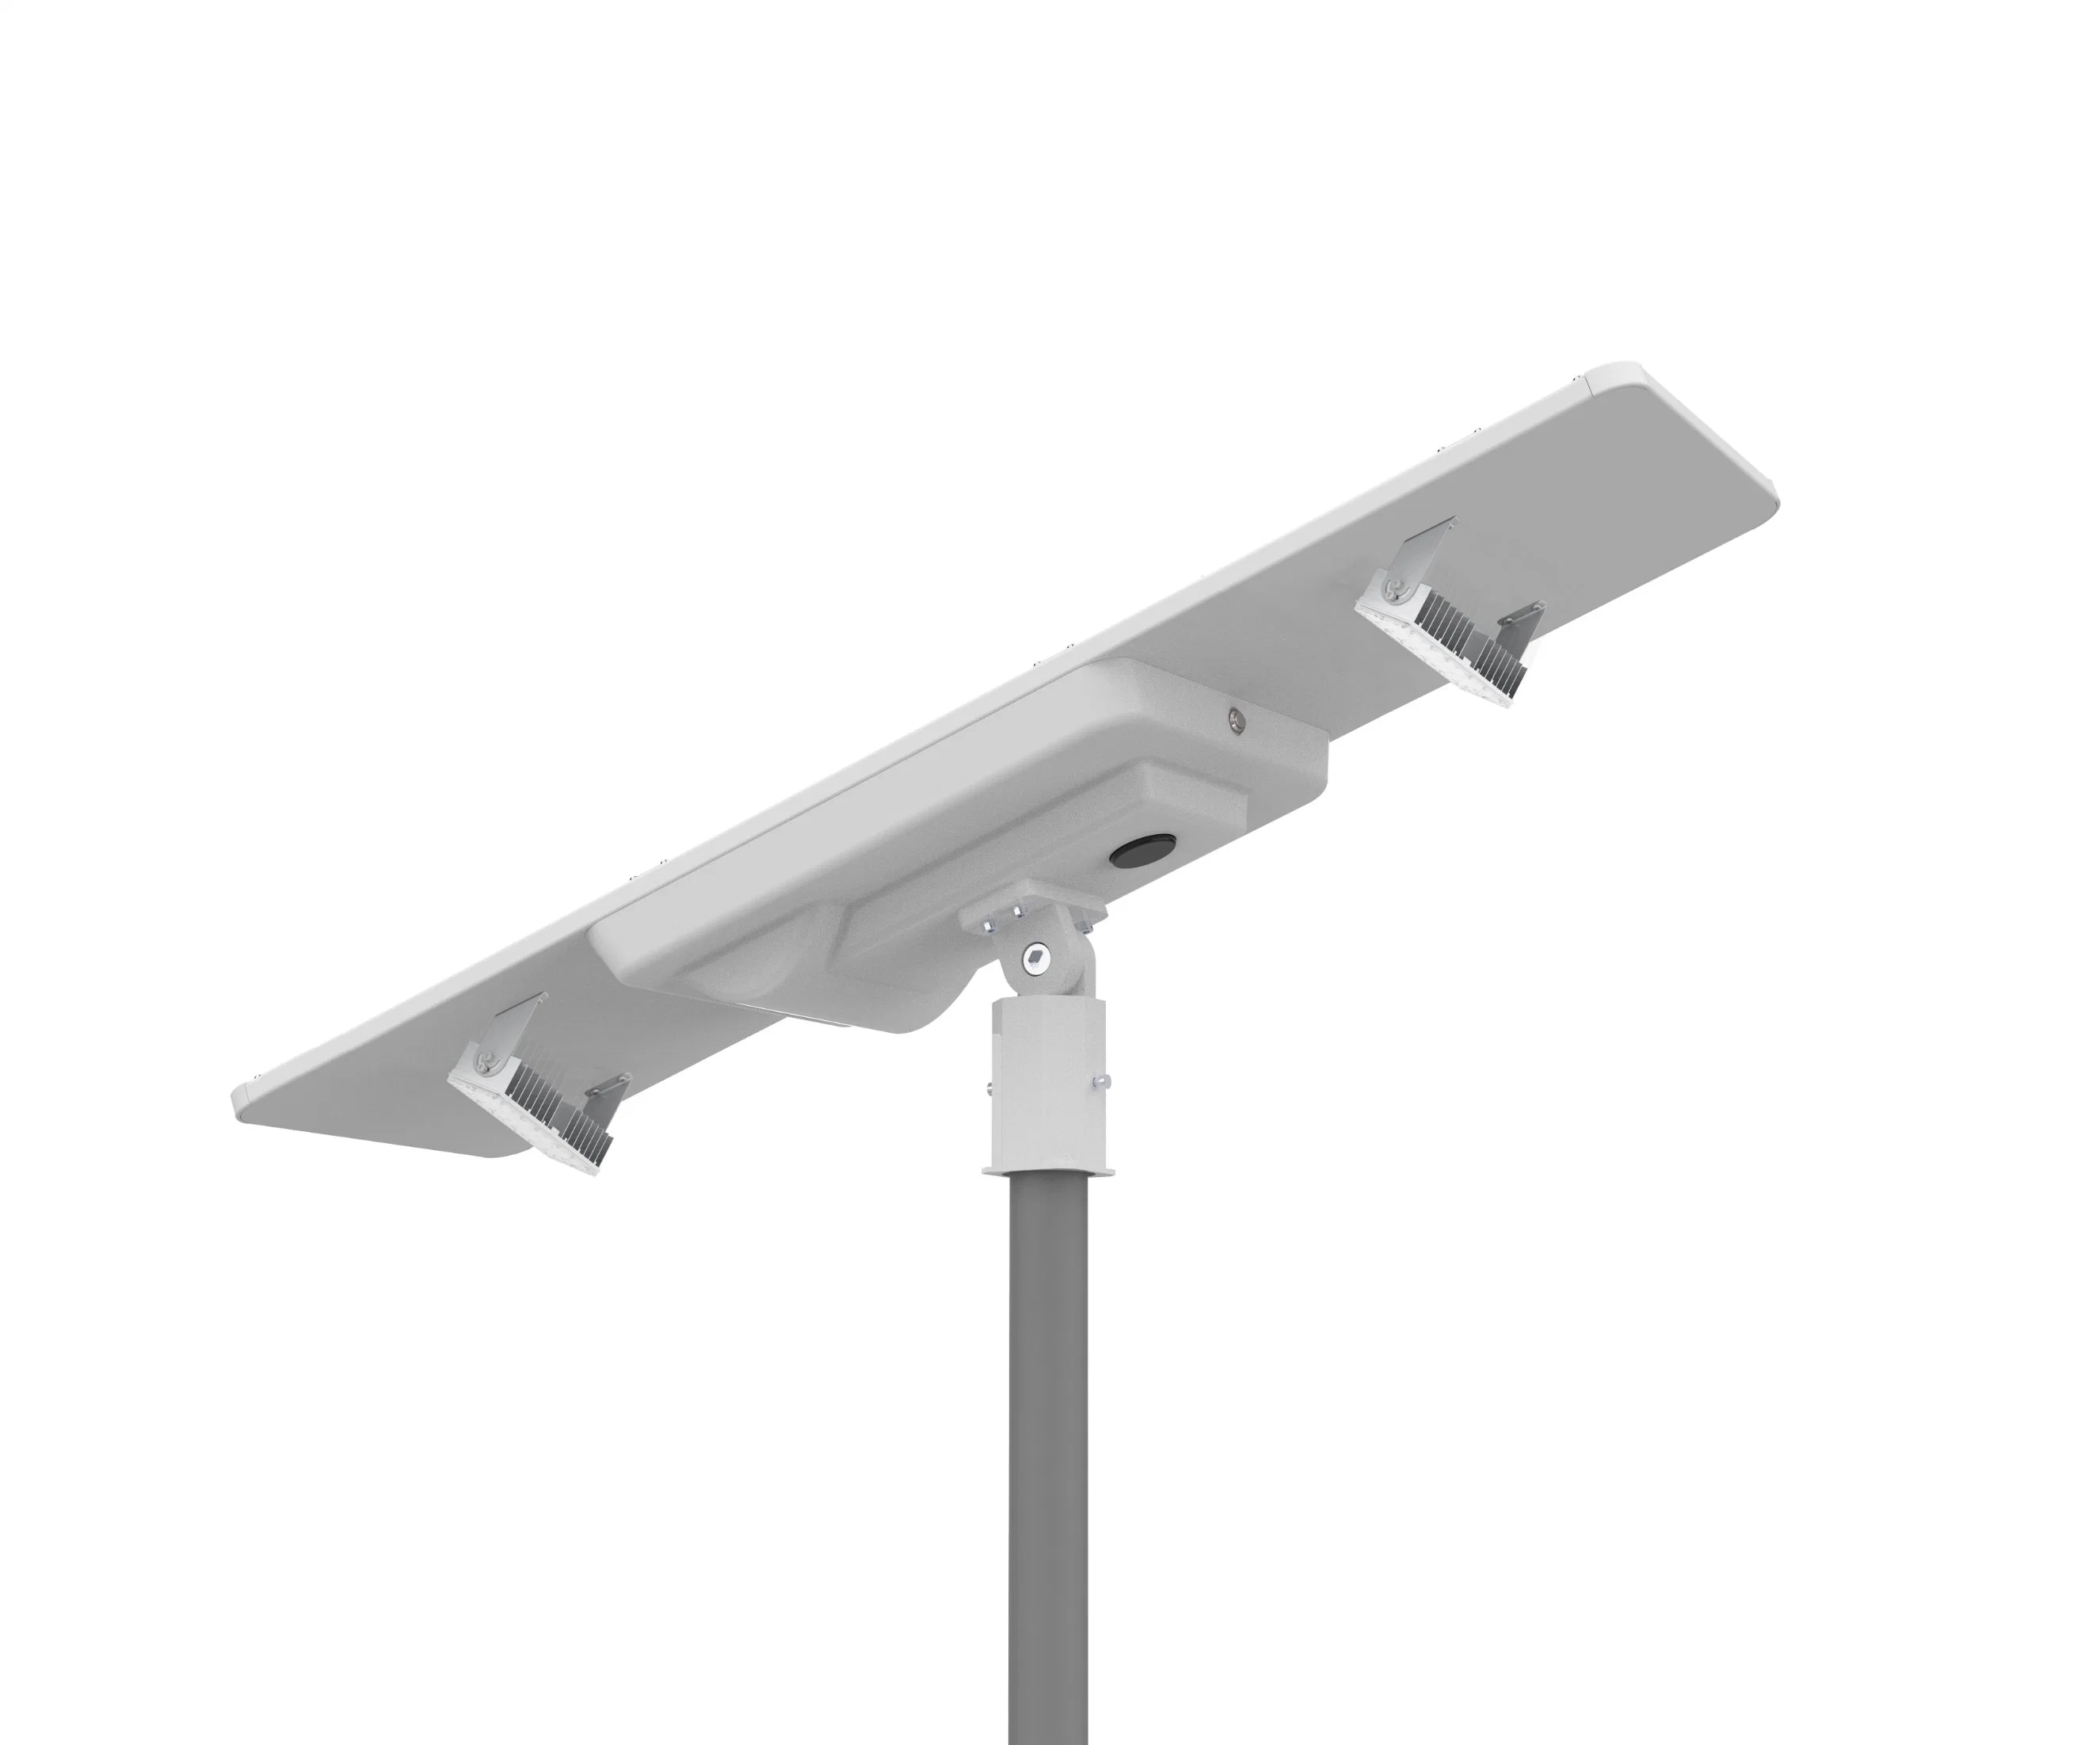 Garden Solar Lamp 30W 40W 60W 80W 100W All in One LED Street Light with MPPT Controller, LiFePO4 Battery and Mono Panel